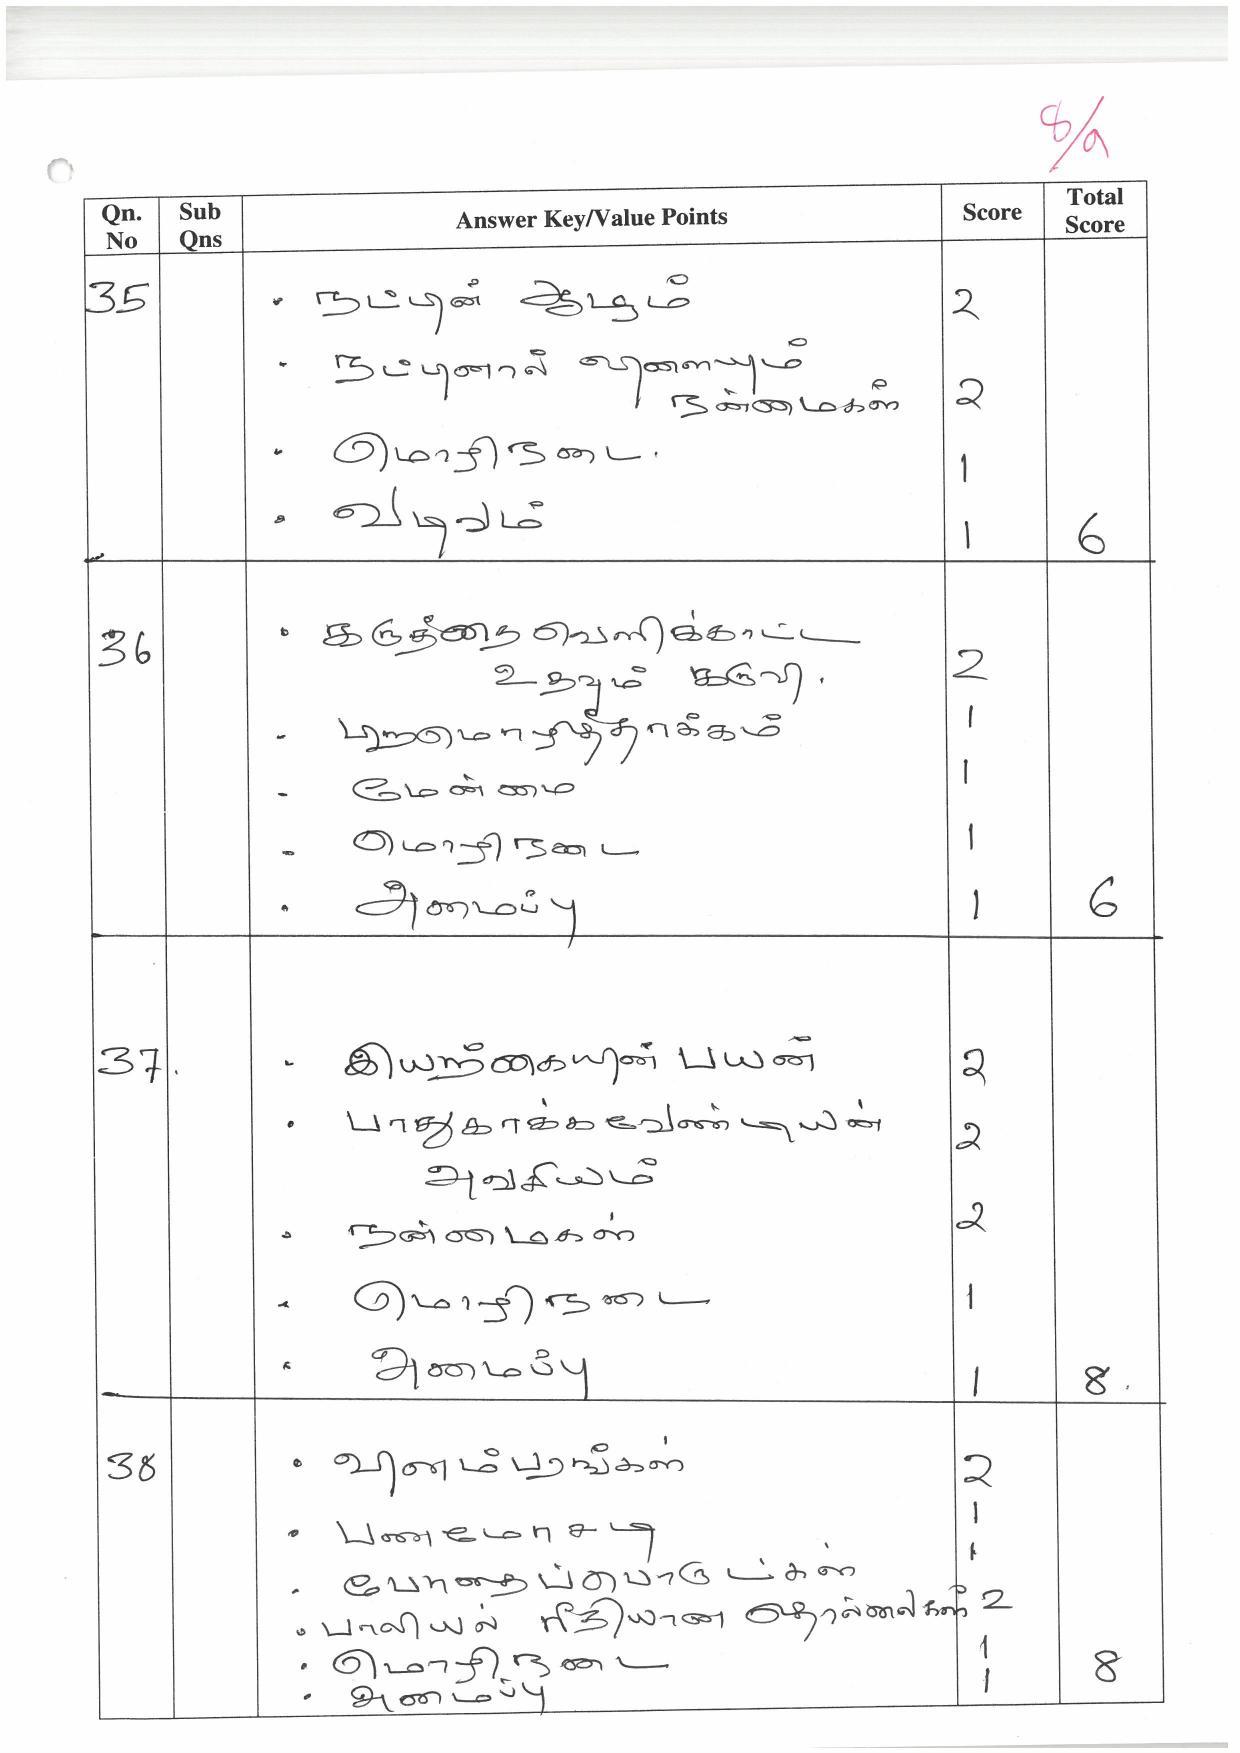 Kerala Plus One (Class 11th) Part-III Tamil-Optional Answer Key 2021 - Page 8